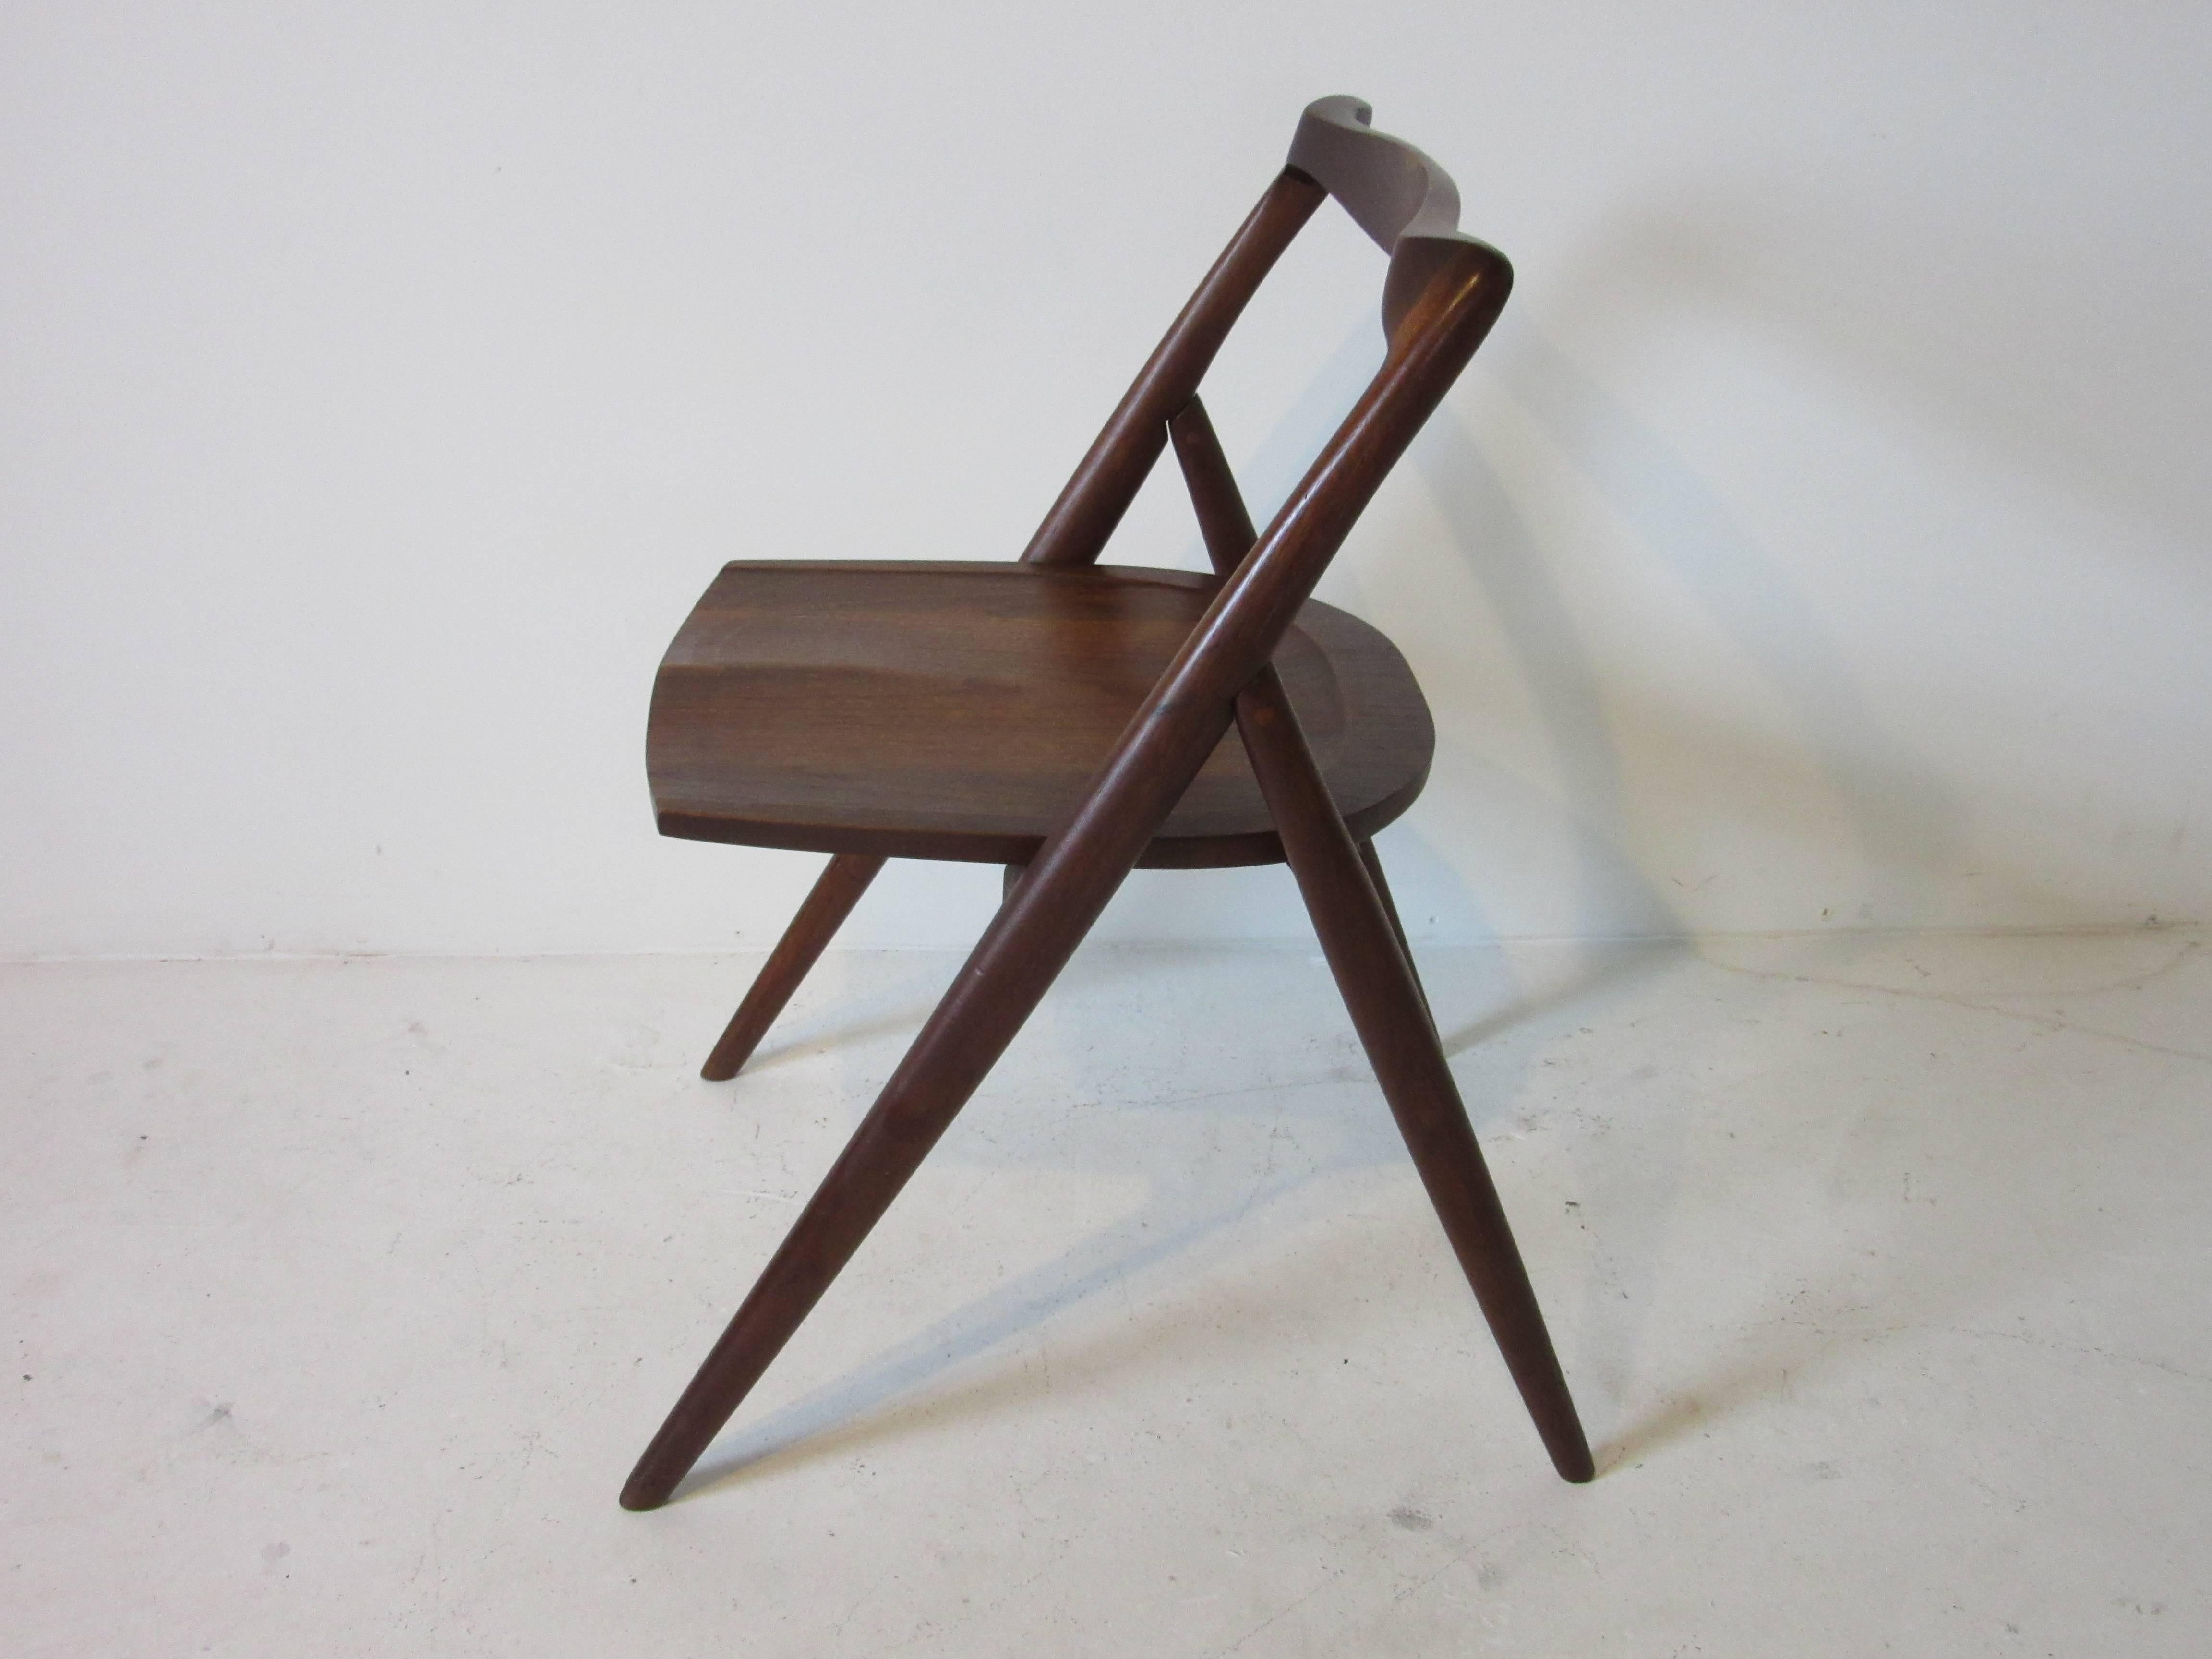 A studio crafted oiled black American walnut sculptural chair in the manner of George Nakashima designed and made by Japanese American George Suyeoka, furniture builder, artist , writer . Living in Chicago George crafted this chair which folds flat